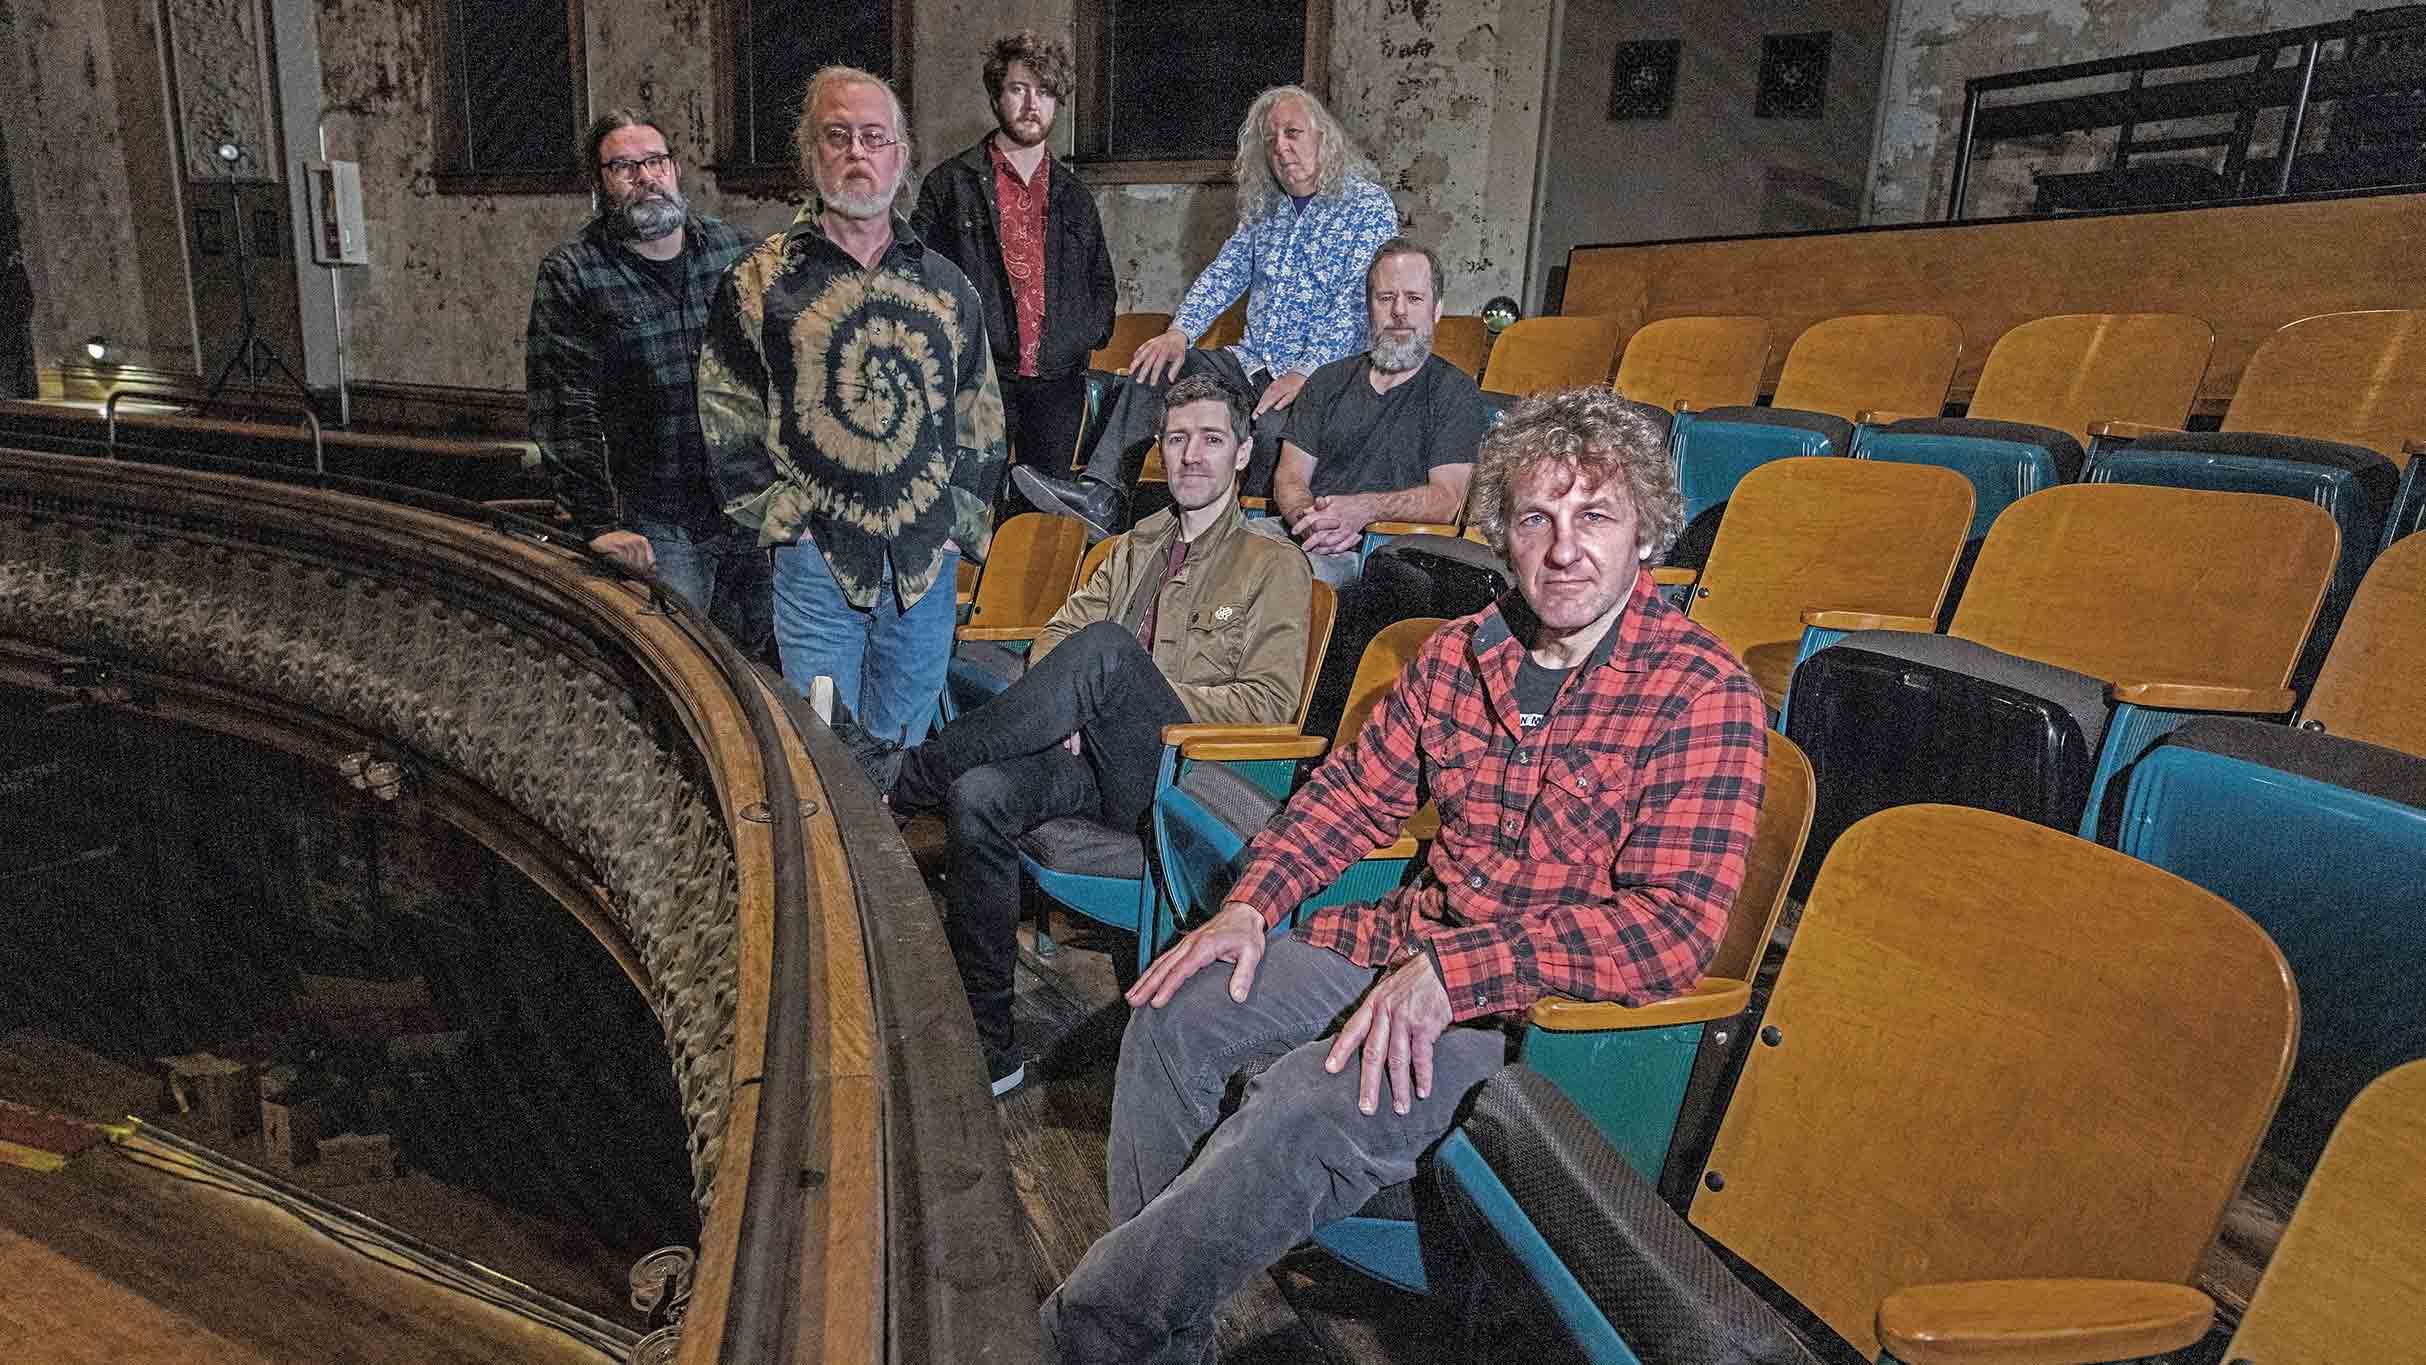 Yonder Mountain String Band, Railroad Earth, & Leftover Salmon in Asbury Park promo photo for Venue Online presale offer code